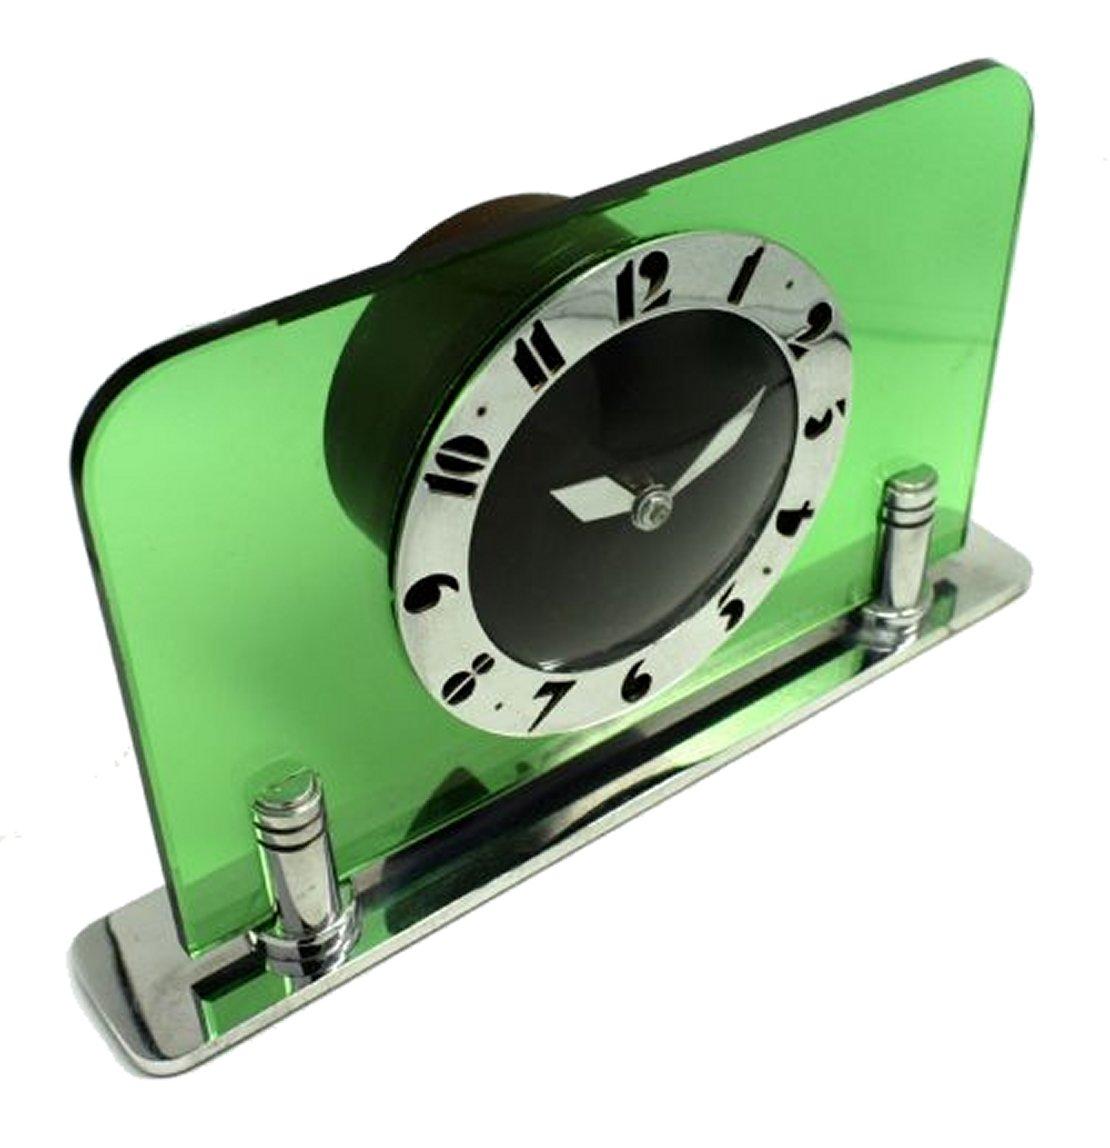 Art Deco Modernist Green Glass Electric Clock By Smiths Clockmakers, c1930 In Good Condition For Sale In Devon, England